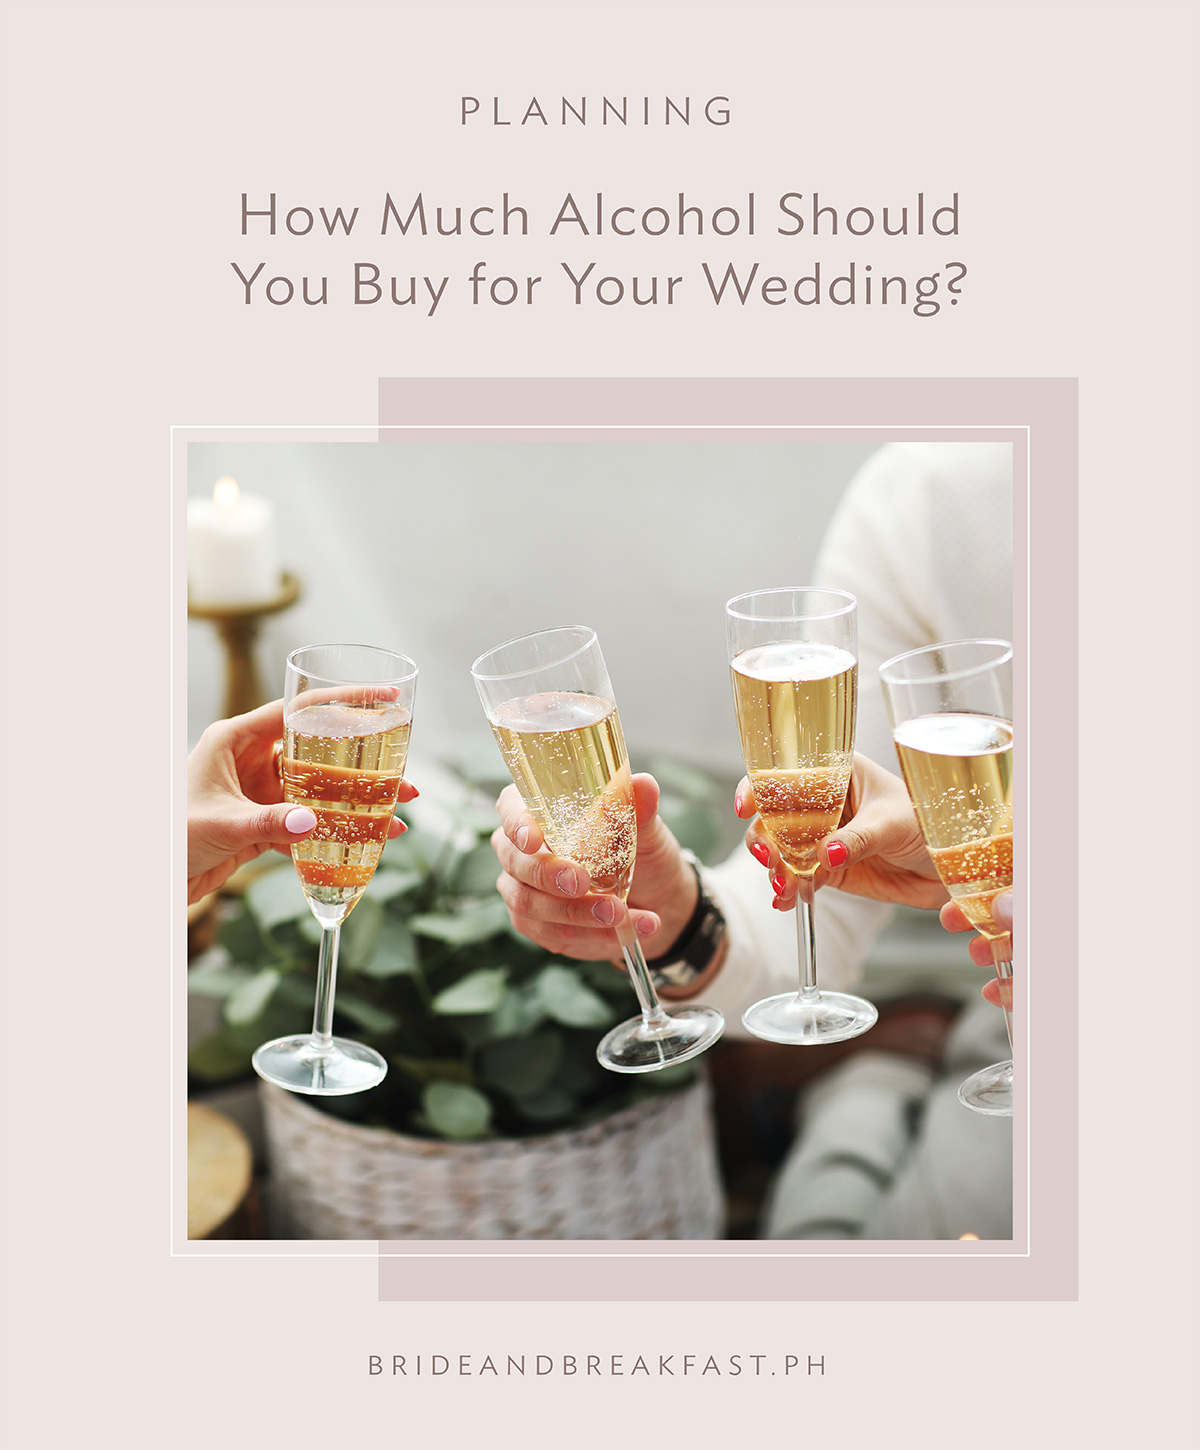 Planning How Much Alcohol Should You Buy for Your Wedding?